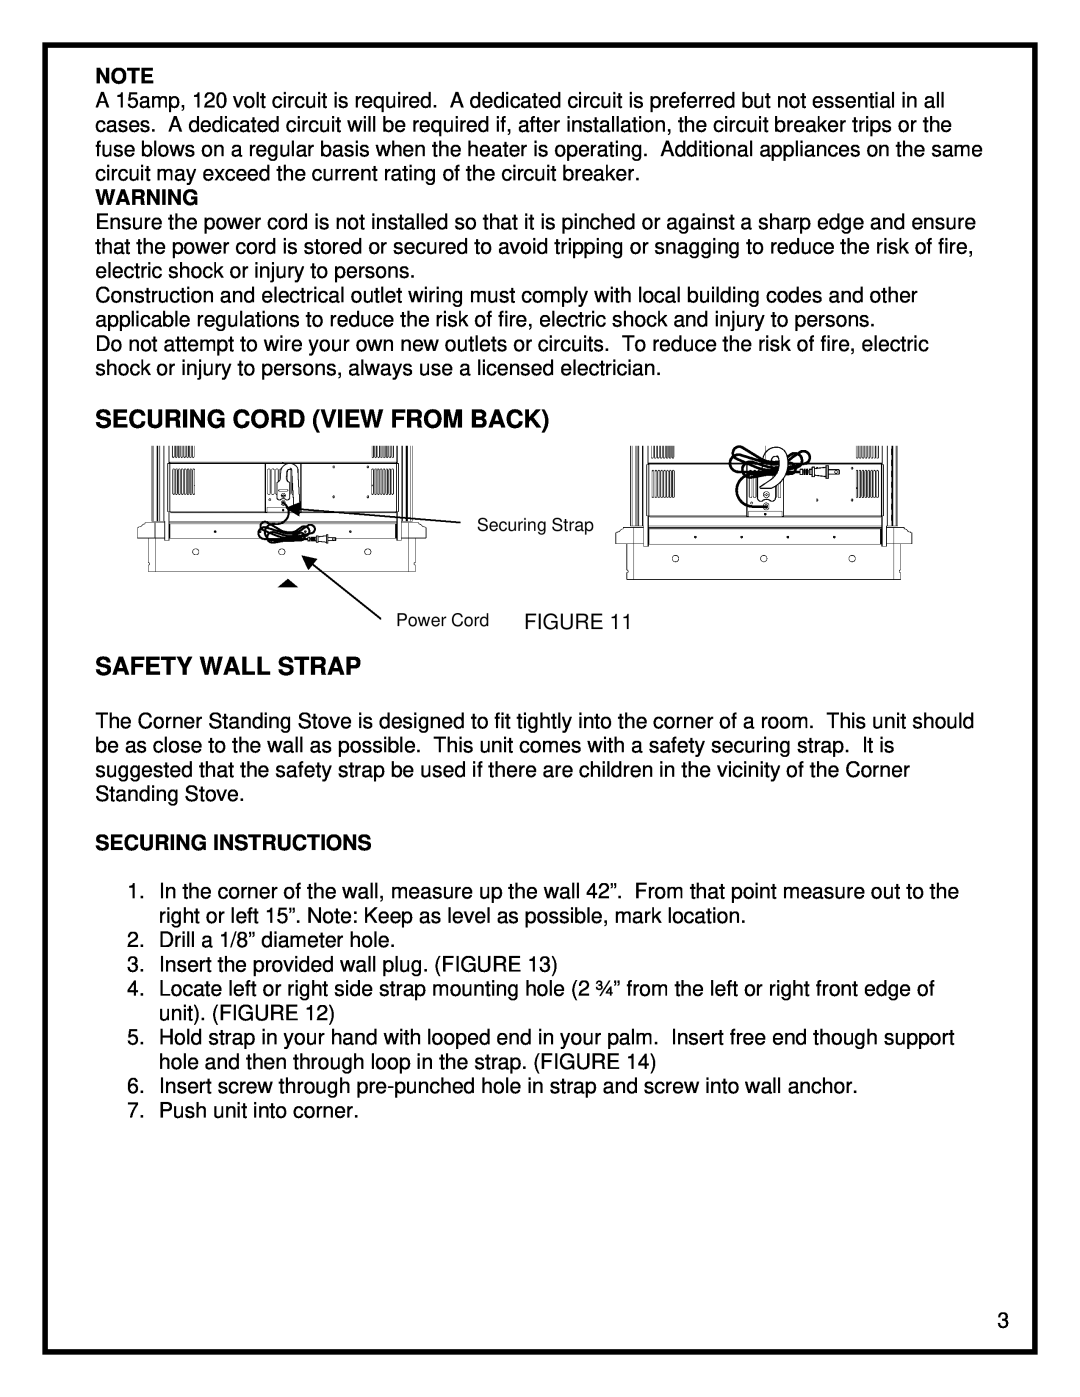 Dimplex Corner Standing Stove manual Securing Cord View From Back, Safety Wall Strap, Securing Instructions 